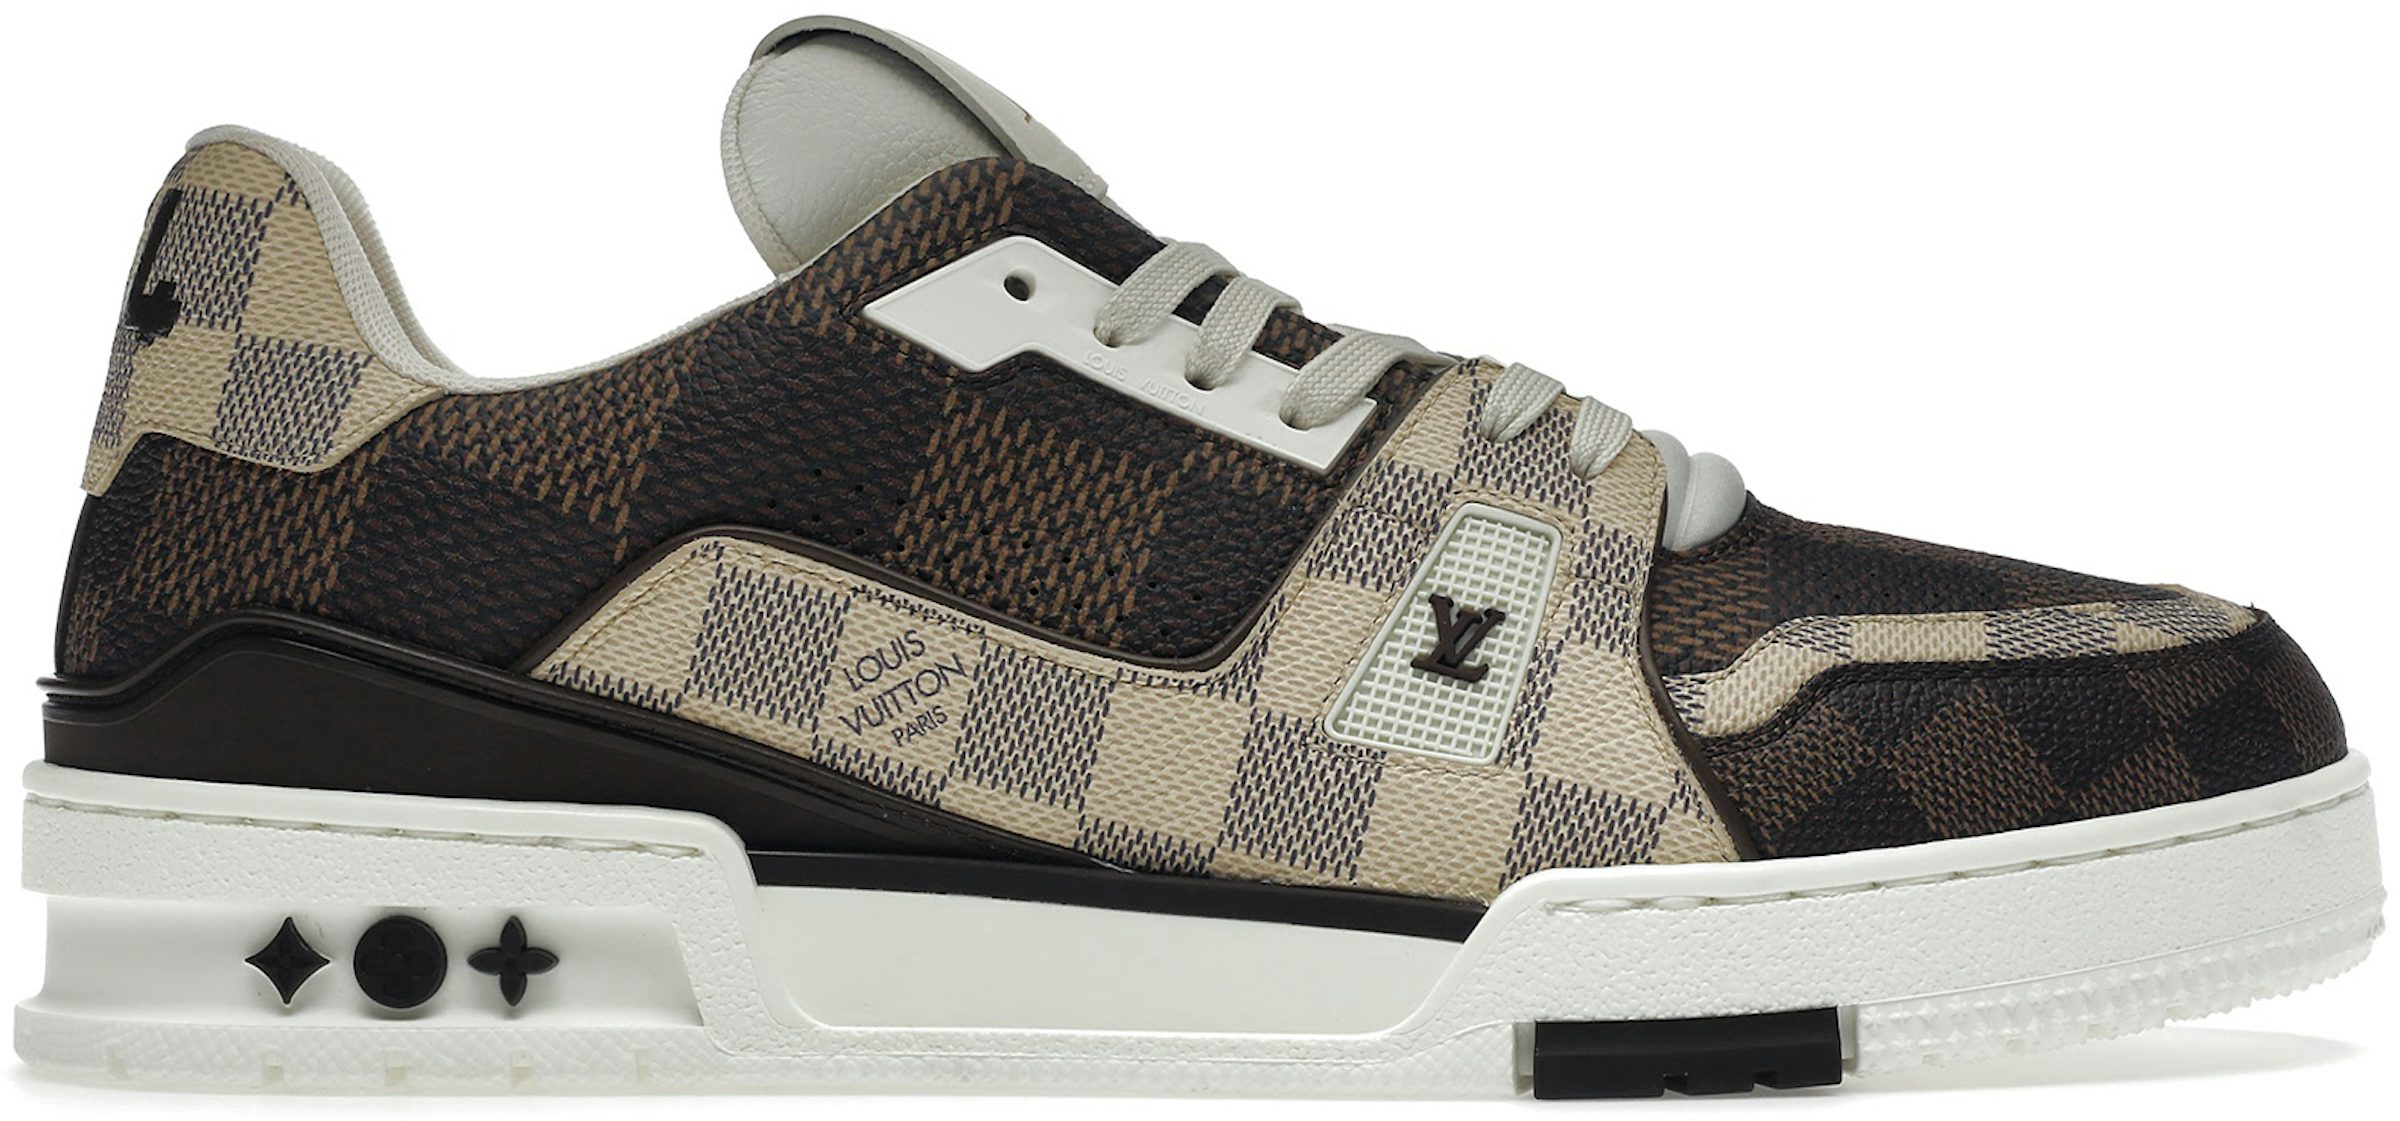 Louis Vuitton Presents a New Iconic Sneaker, the LV Runner Tatic